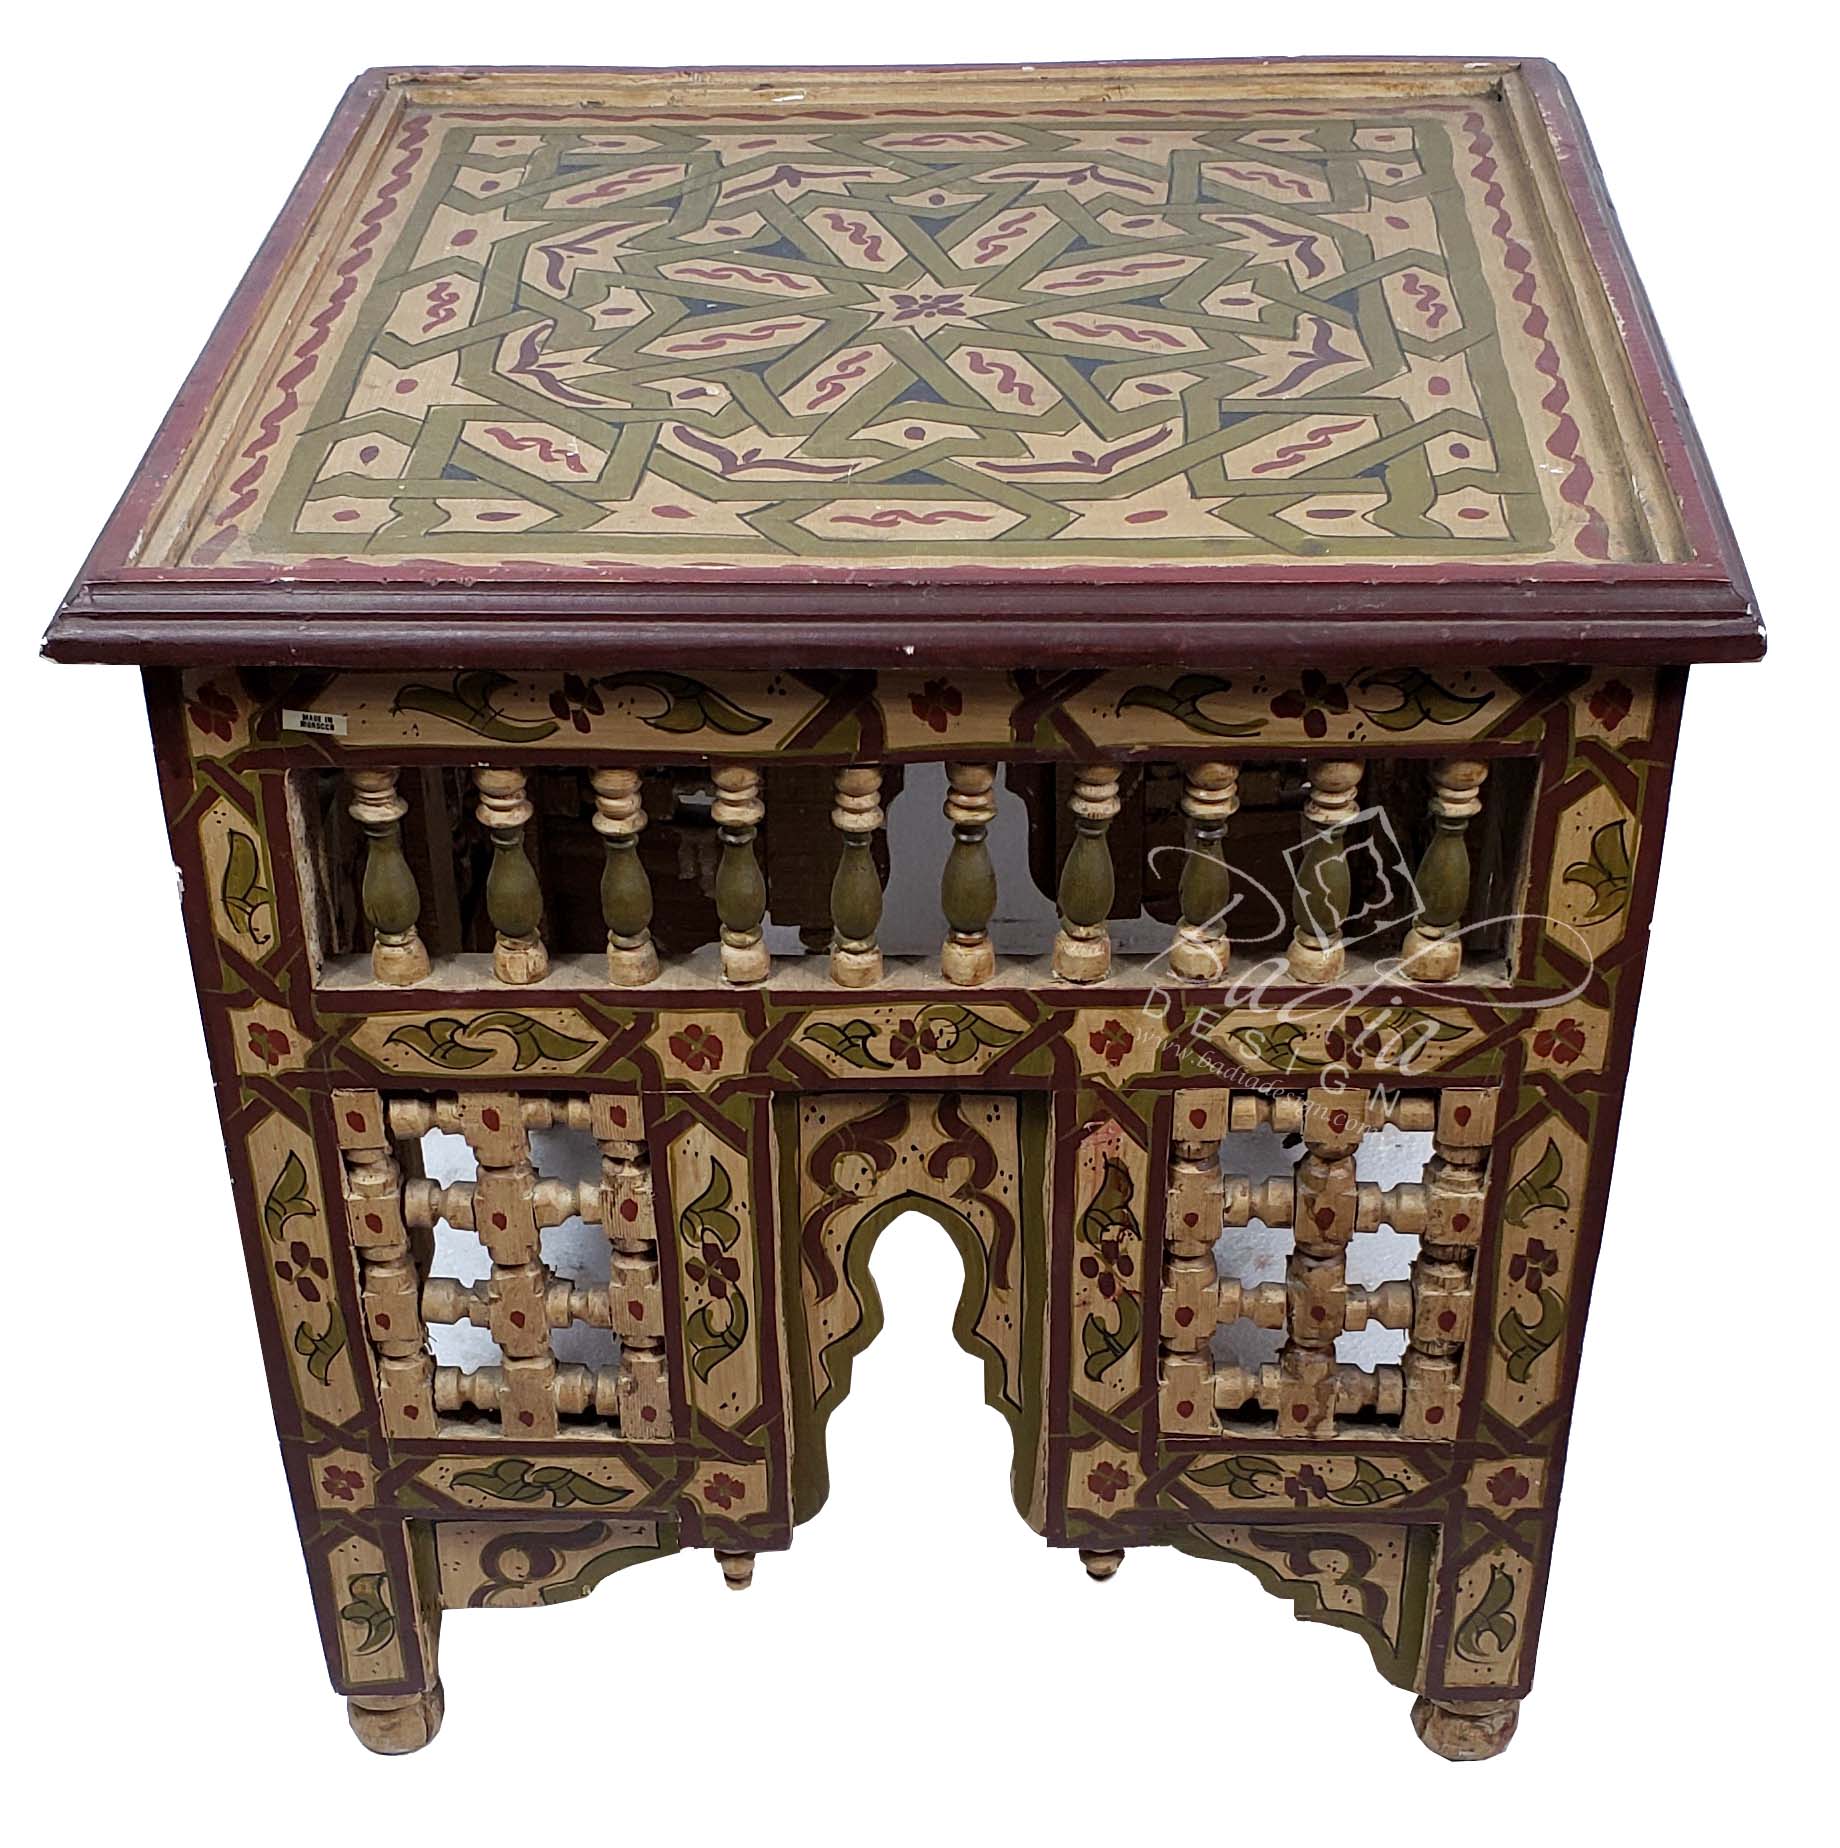 moroccan-hand-painted-square-side-table-hps011-1.jpg